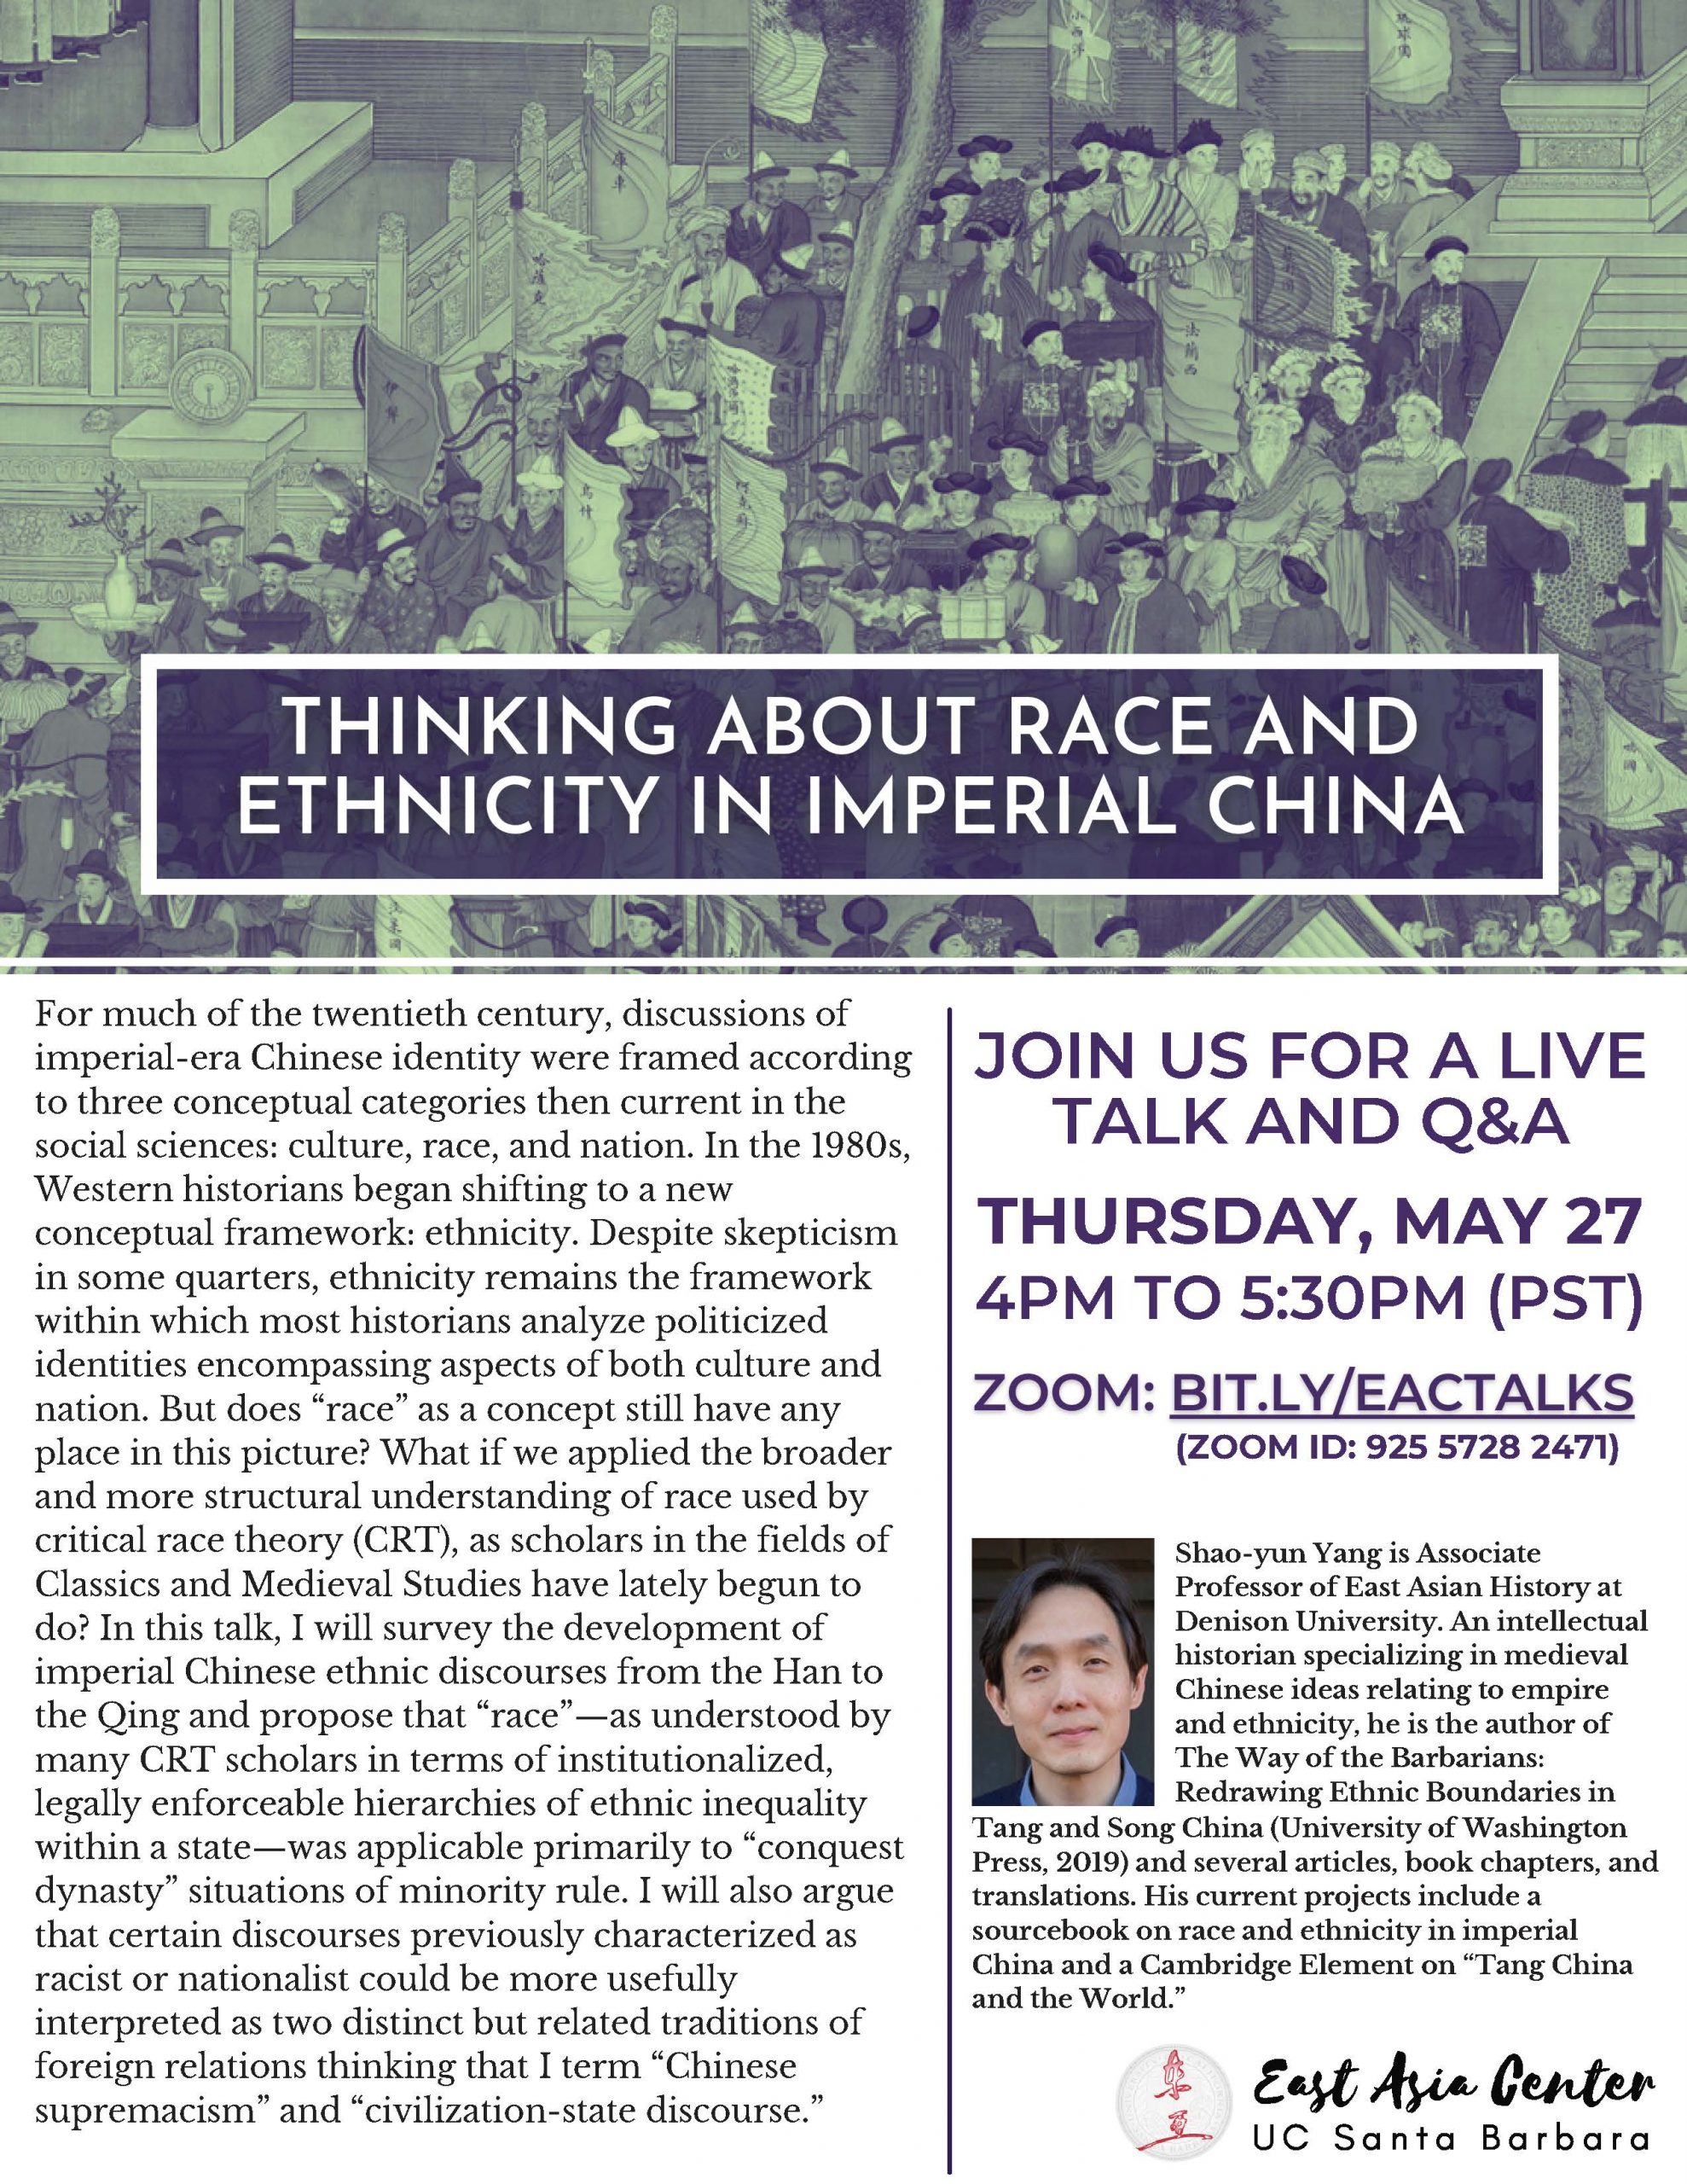 Flyer for Zoom talk "Thinking about Race and Ethnicity in Imperial China" by Shao-yun Yang on 5/27 at 4-5:30PM